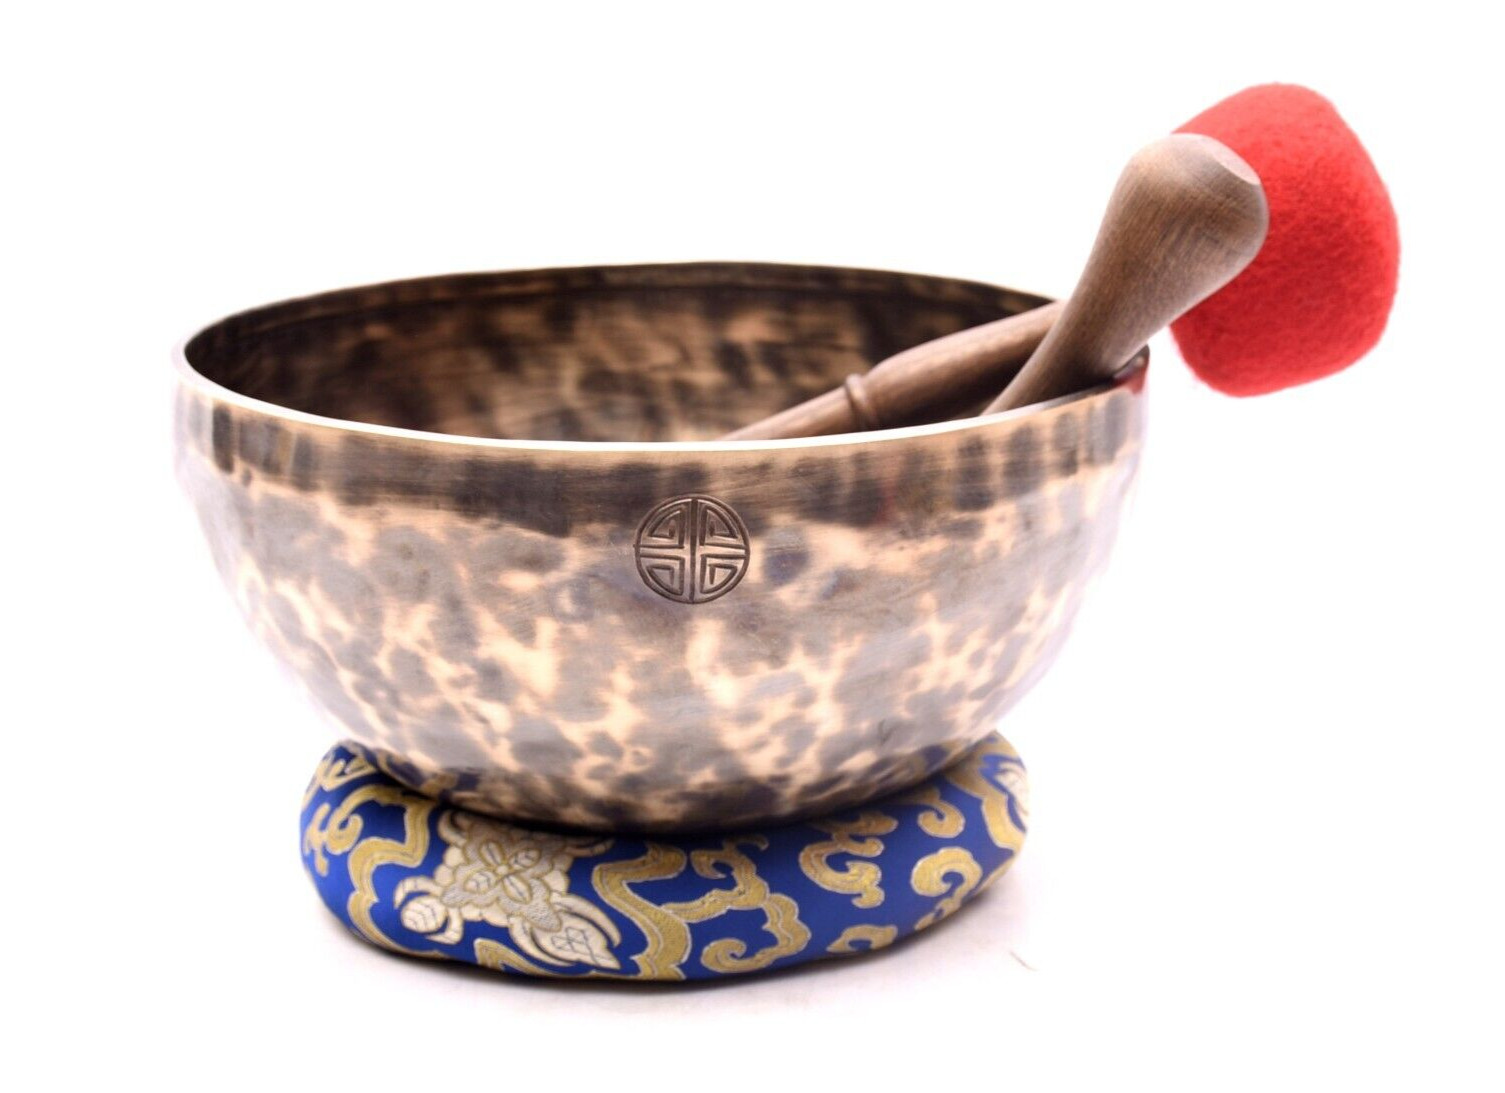 10 inches full moon singing bowls - 26 cm Healing bowl meditation stress relief